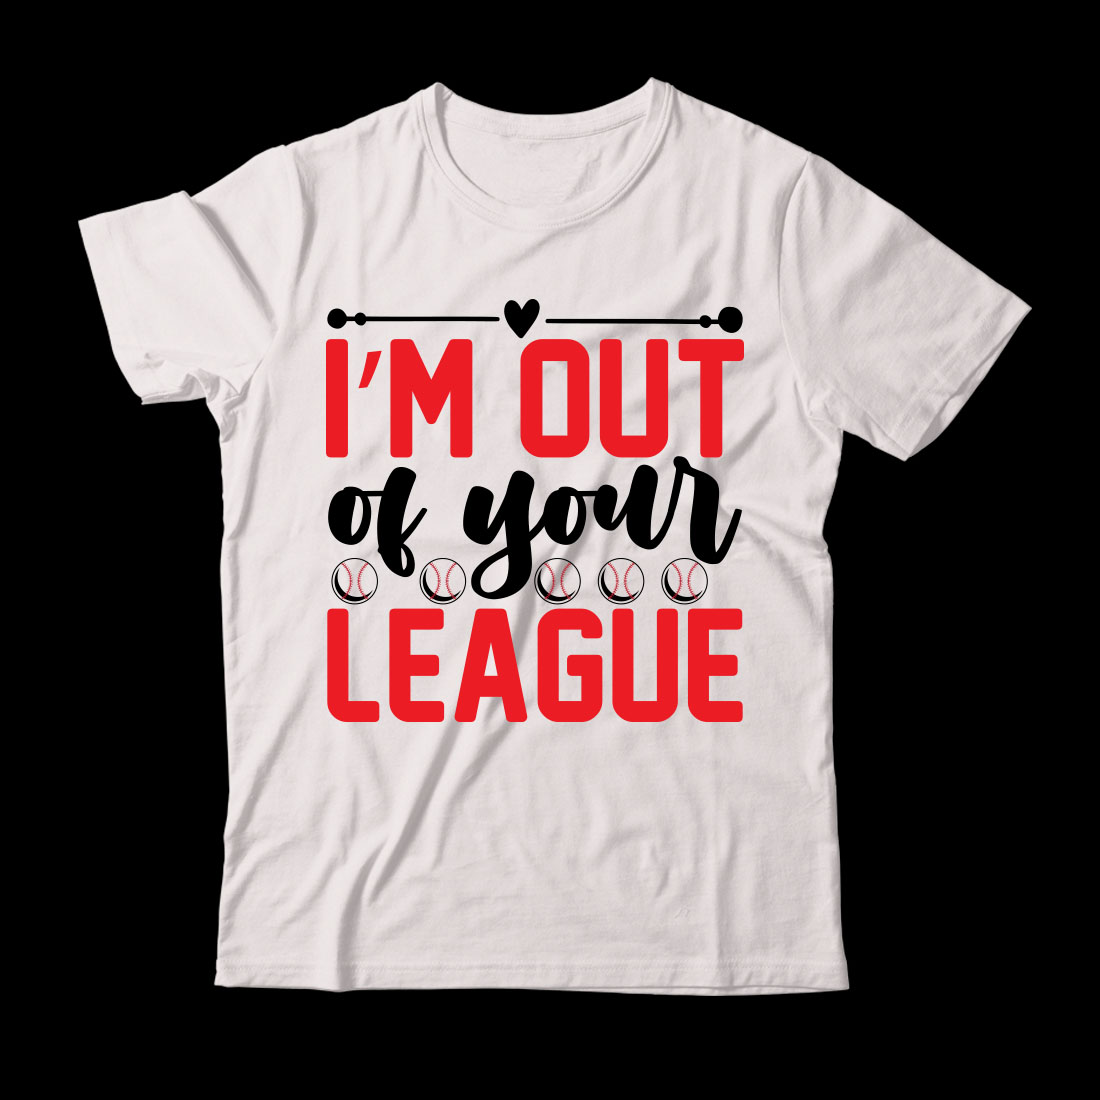 White t - shirt that says i'm out of your league.